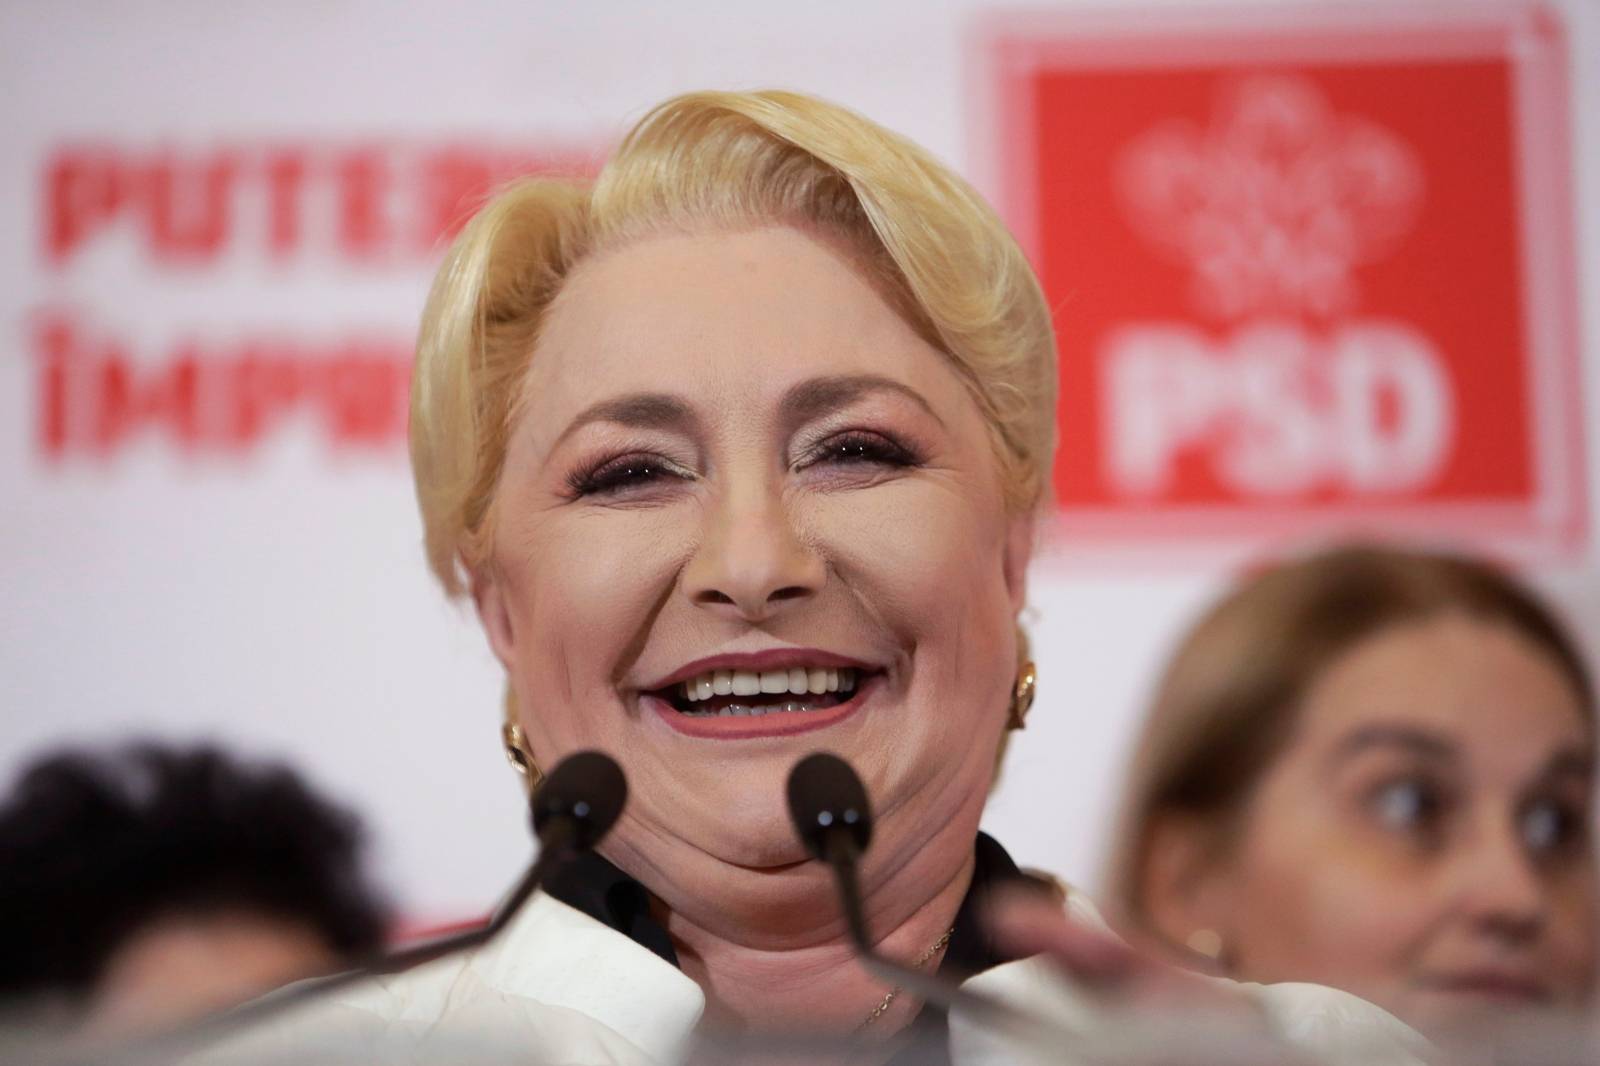 Former Romanian Prime Minister and presidential candidate Viorica Dancila reacts during a news conference marking the end of the first round of the presidential election